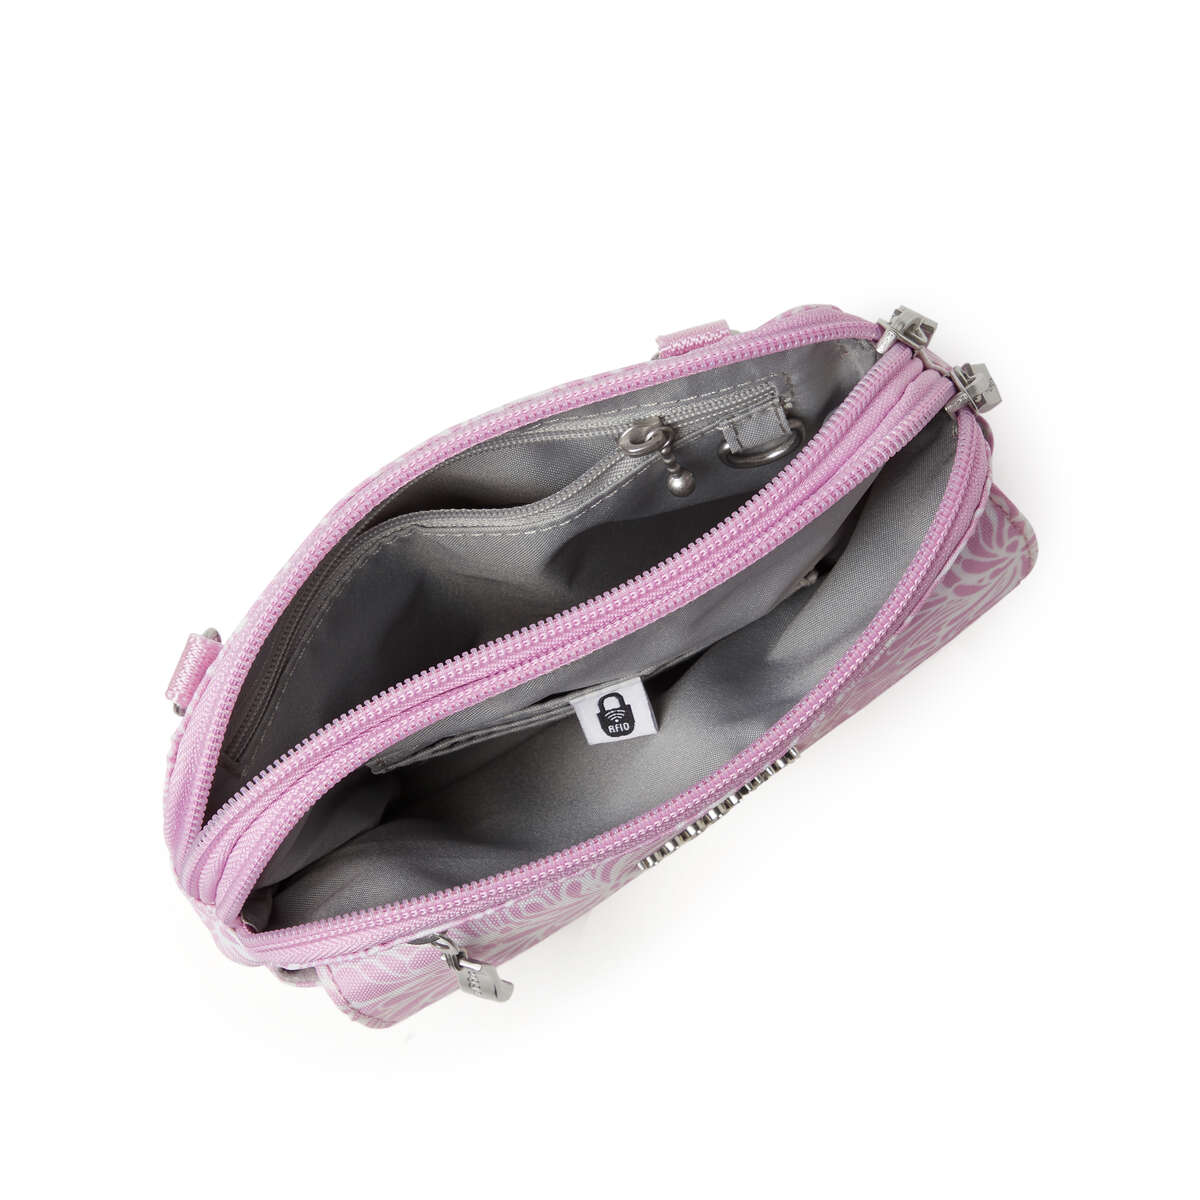 view inside interior of baggallini modern everywhere mini bag in pink blossom color